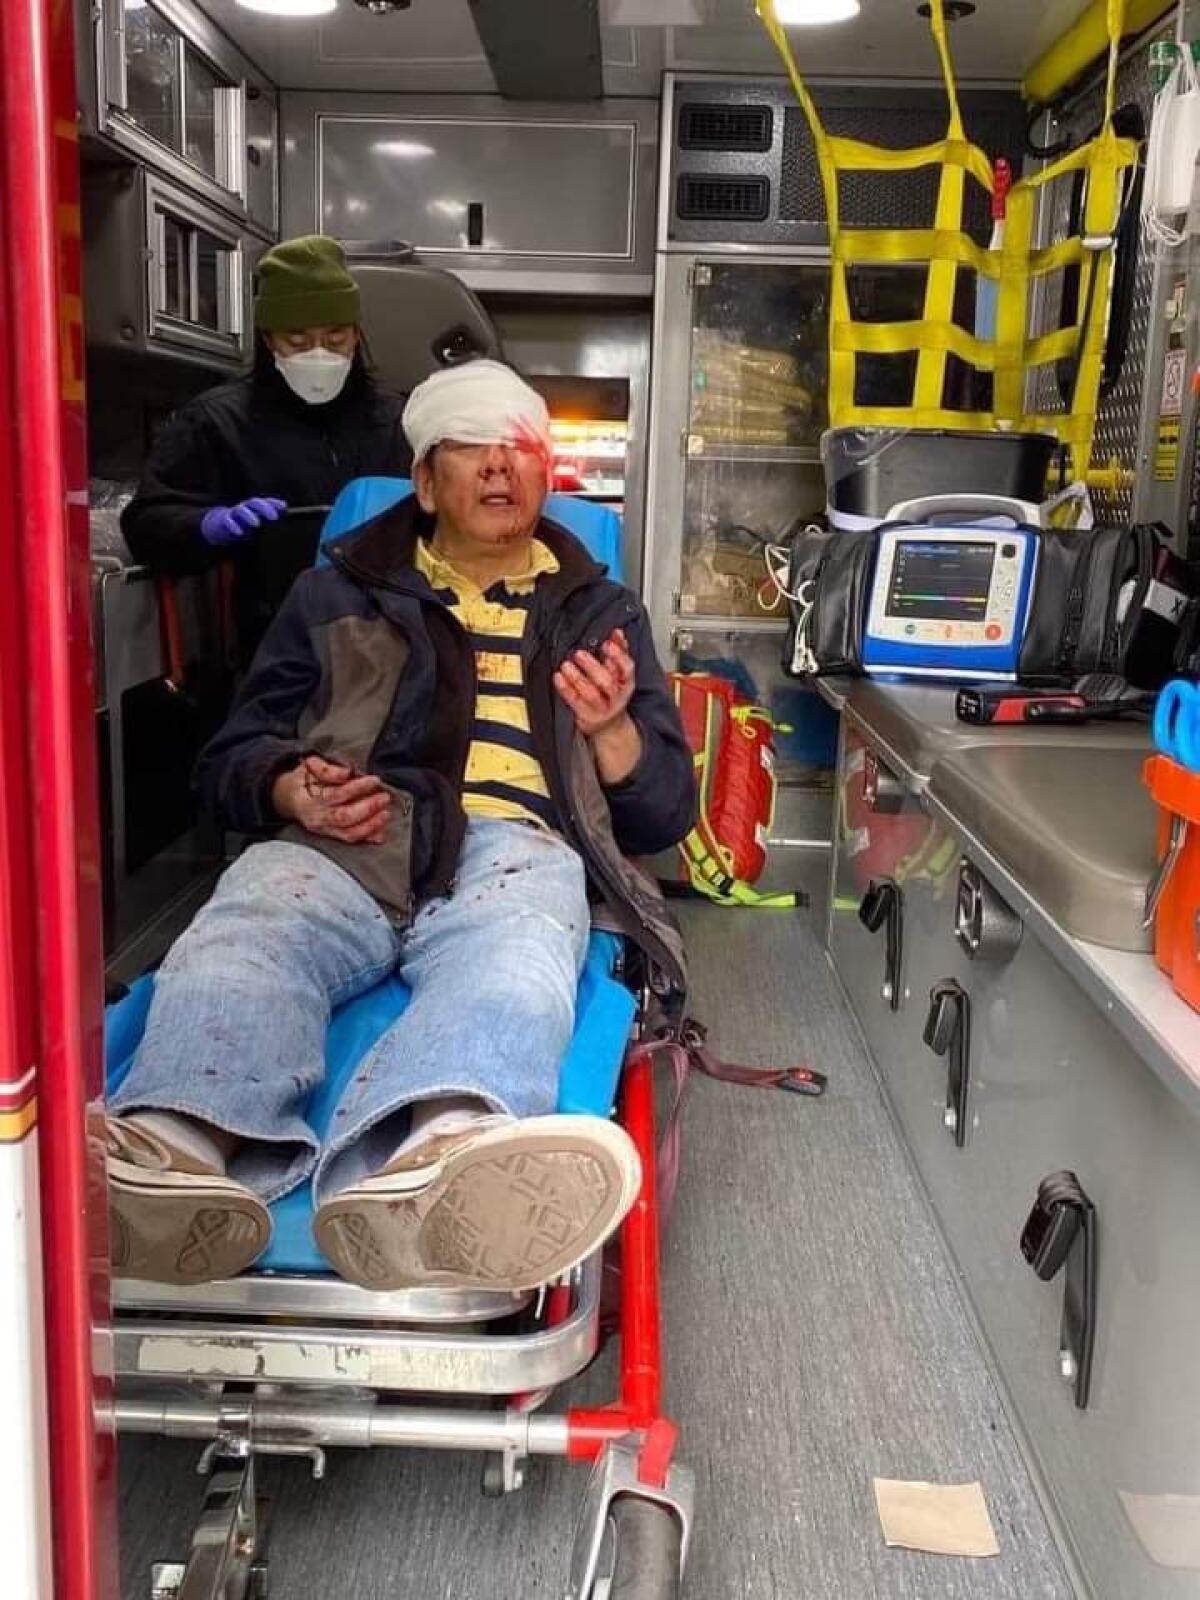 Danilo Yuchang, 59, sits in an ambulance with a white bandage around his head.